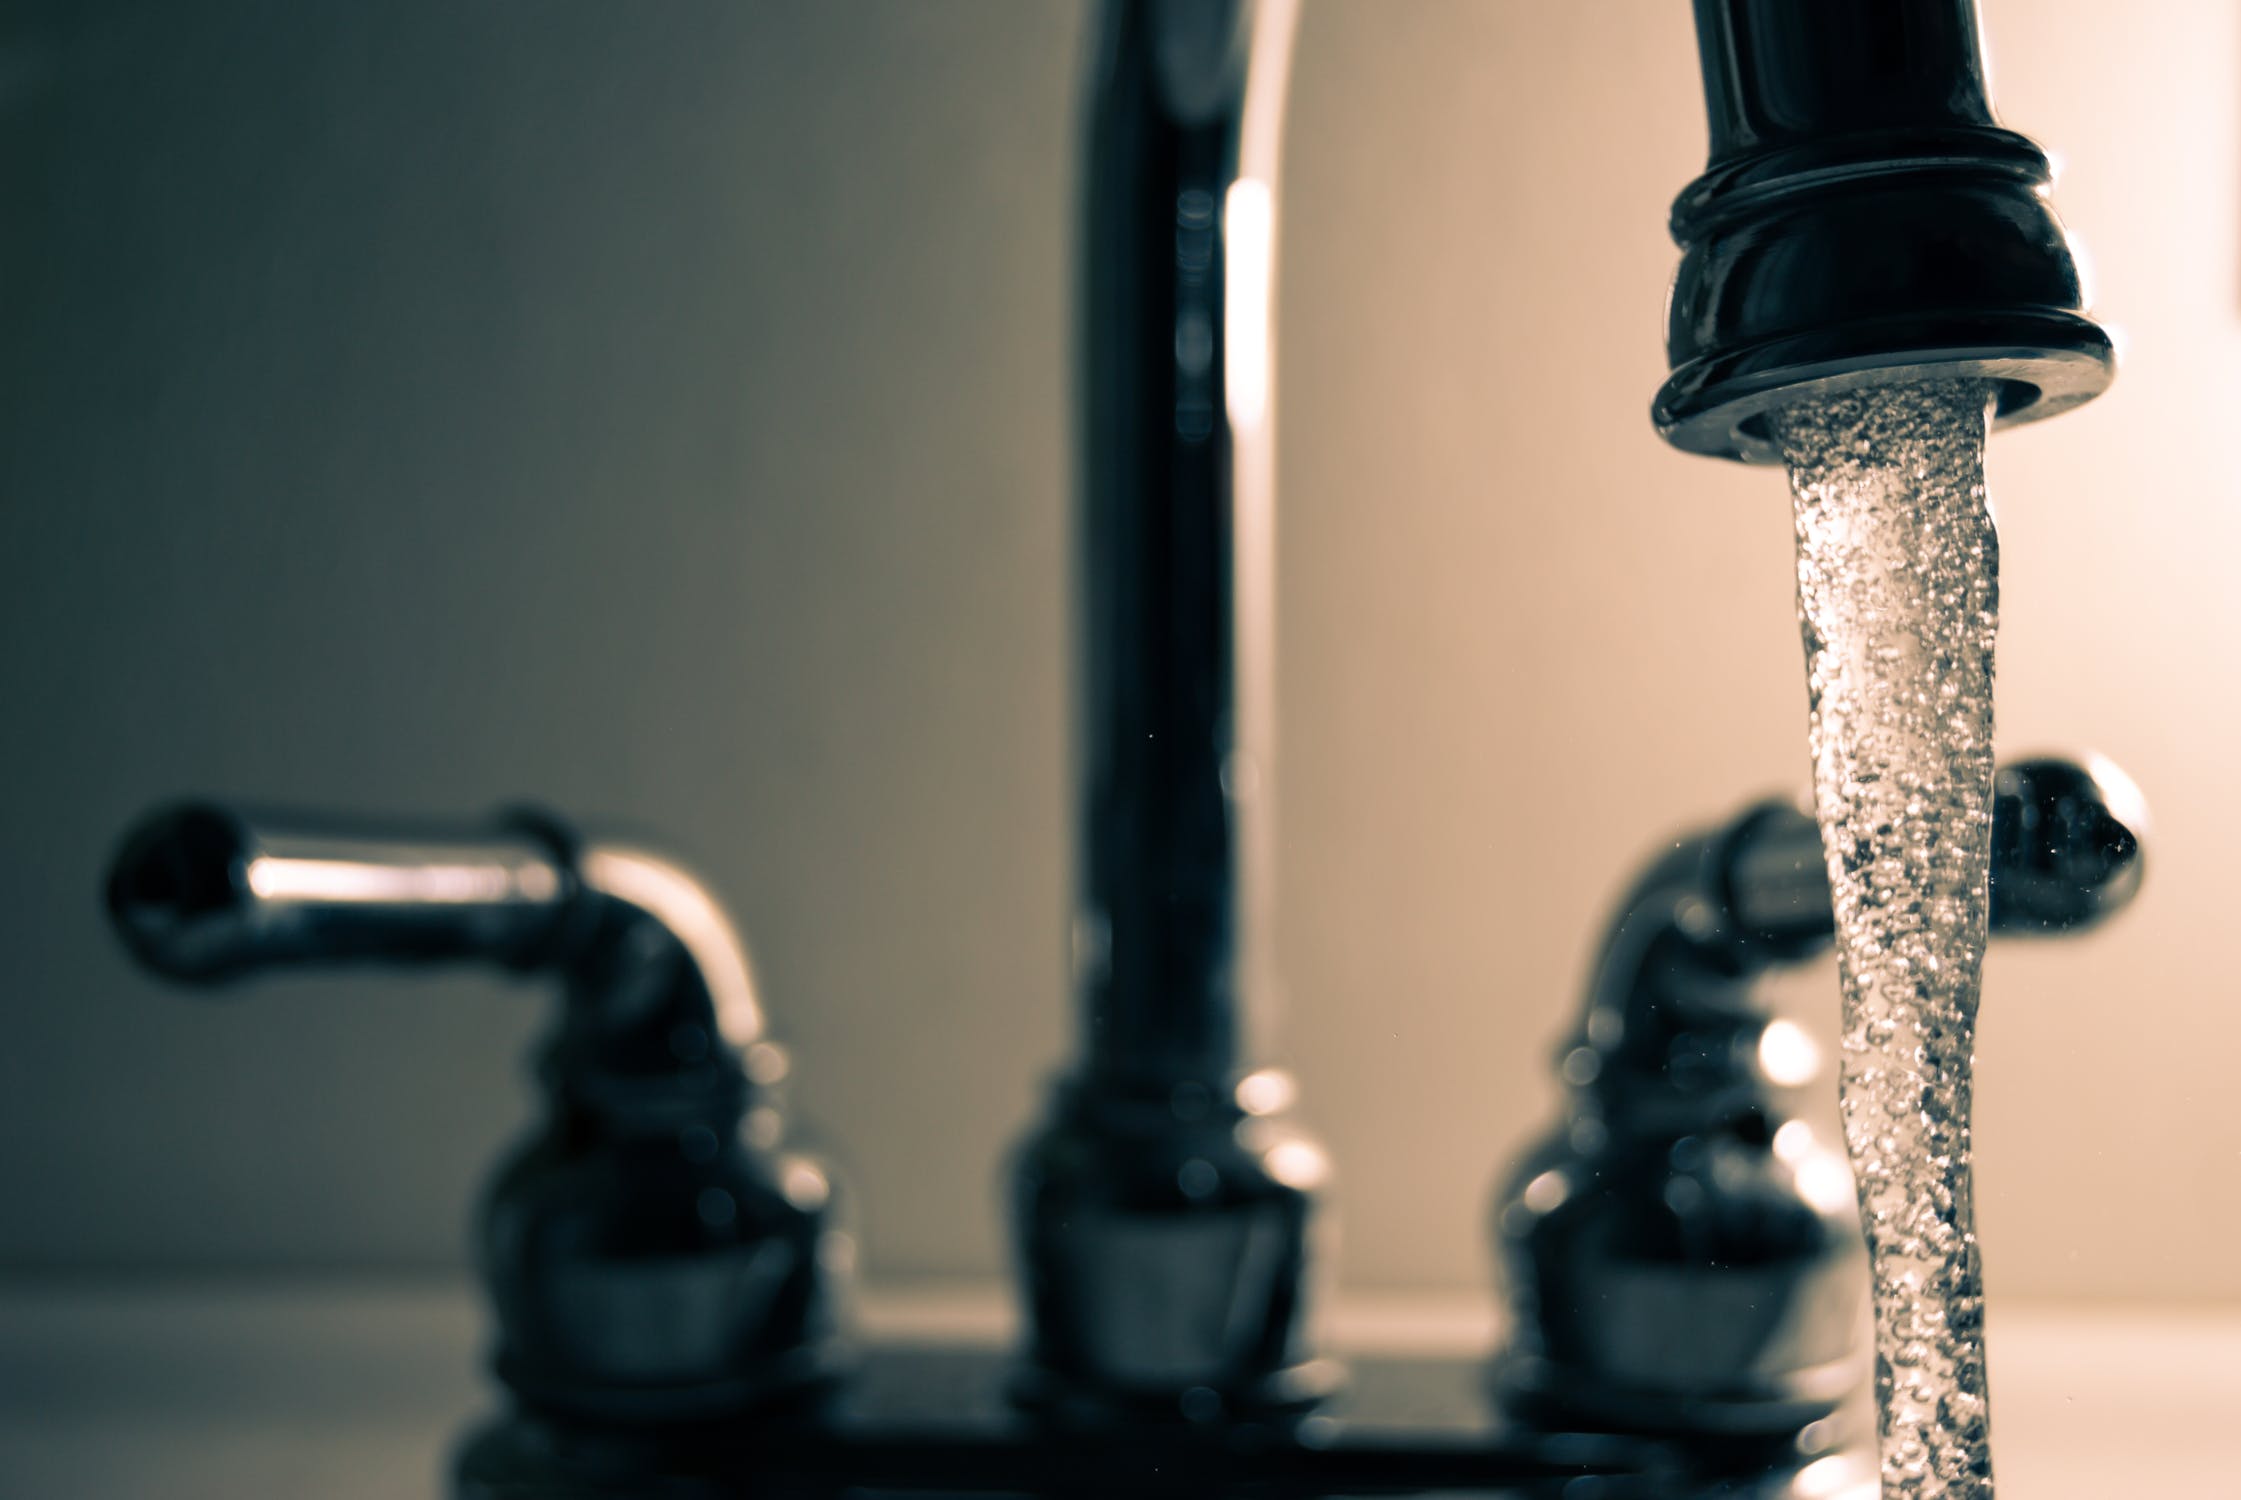 Need faucet repair or faucet installation plumbing services? Our expert plumbers provide professional and reliable services to fix or install faucets in your home. Contact us for a quick and efficient solution. Plumbing services near me. Plumbing faucet repair.